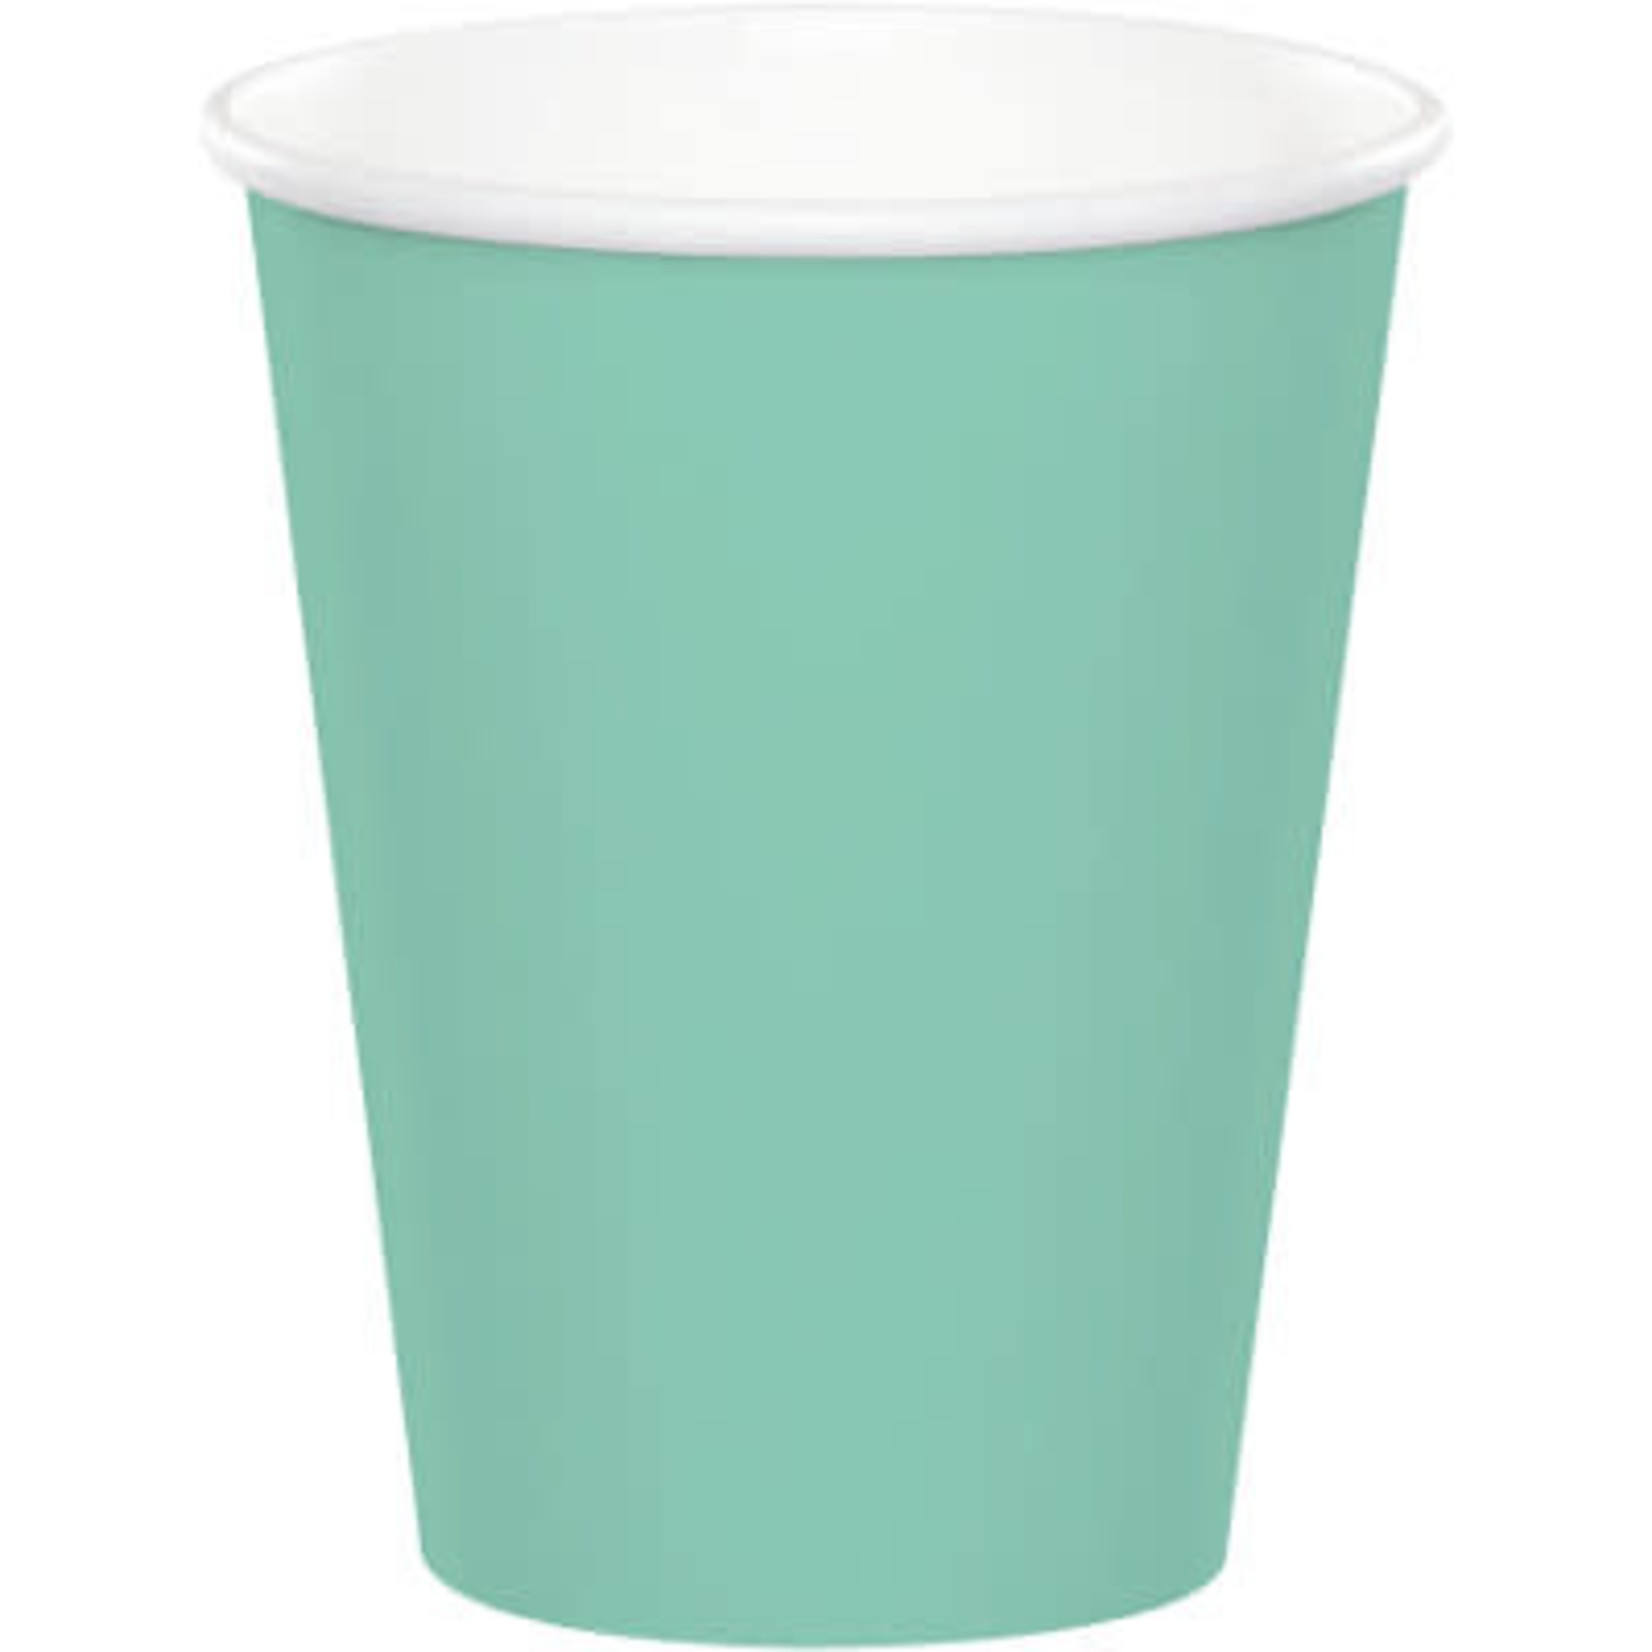 Touch of Color 9oz. Mint Green Hot/Cold Paper Cups - 24ct.